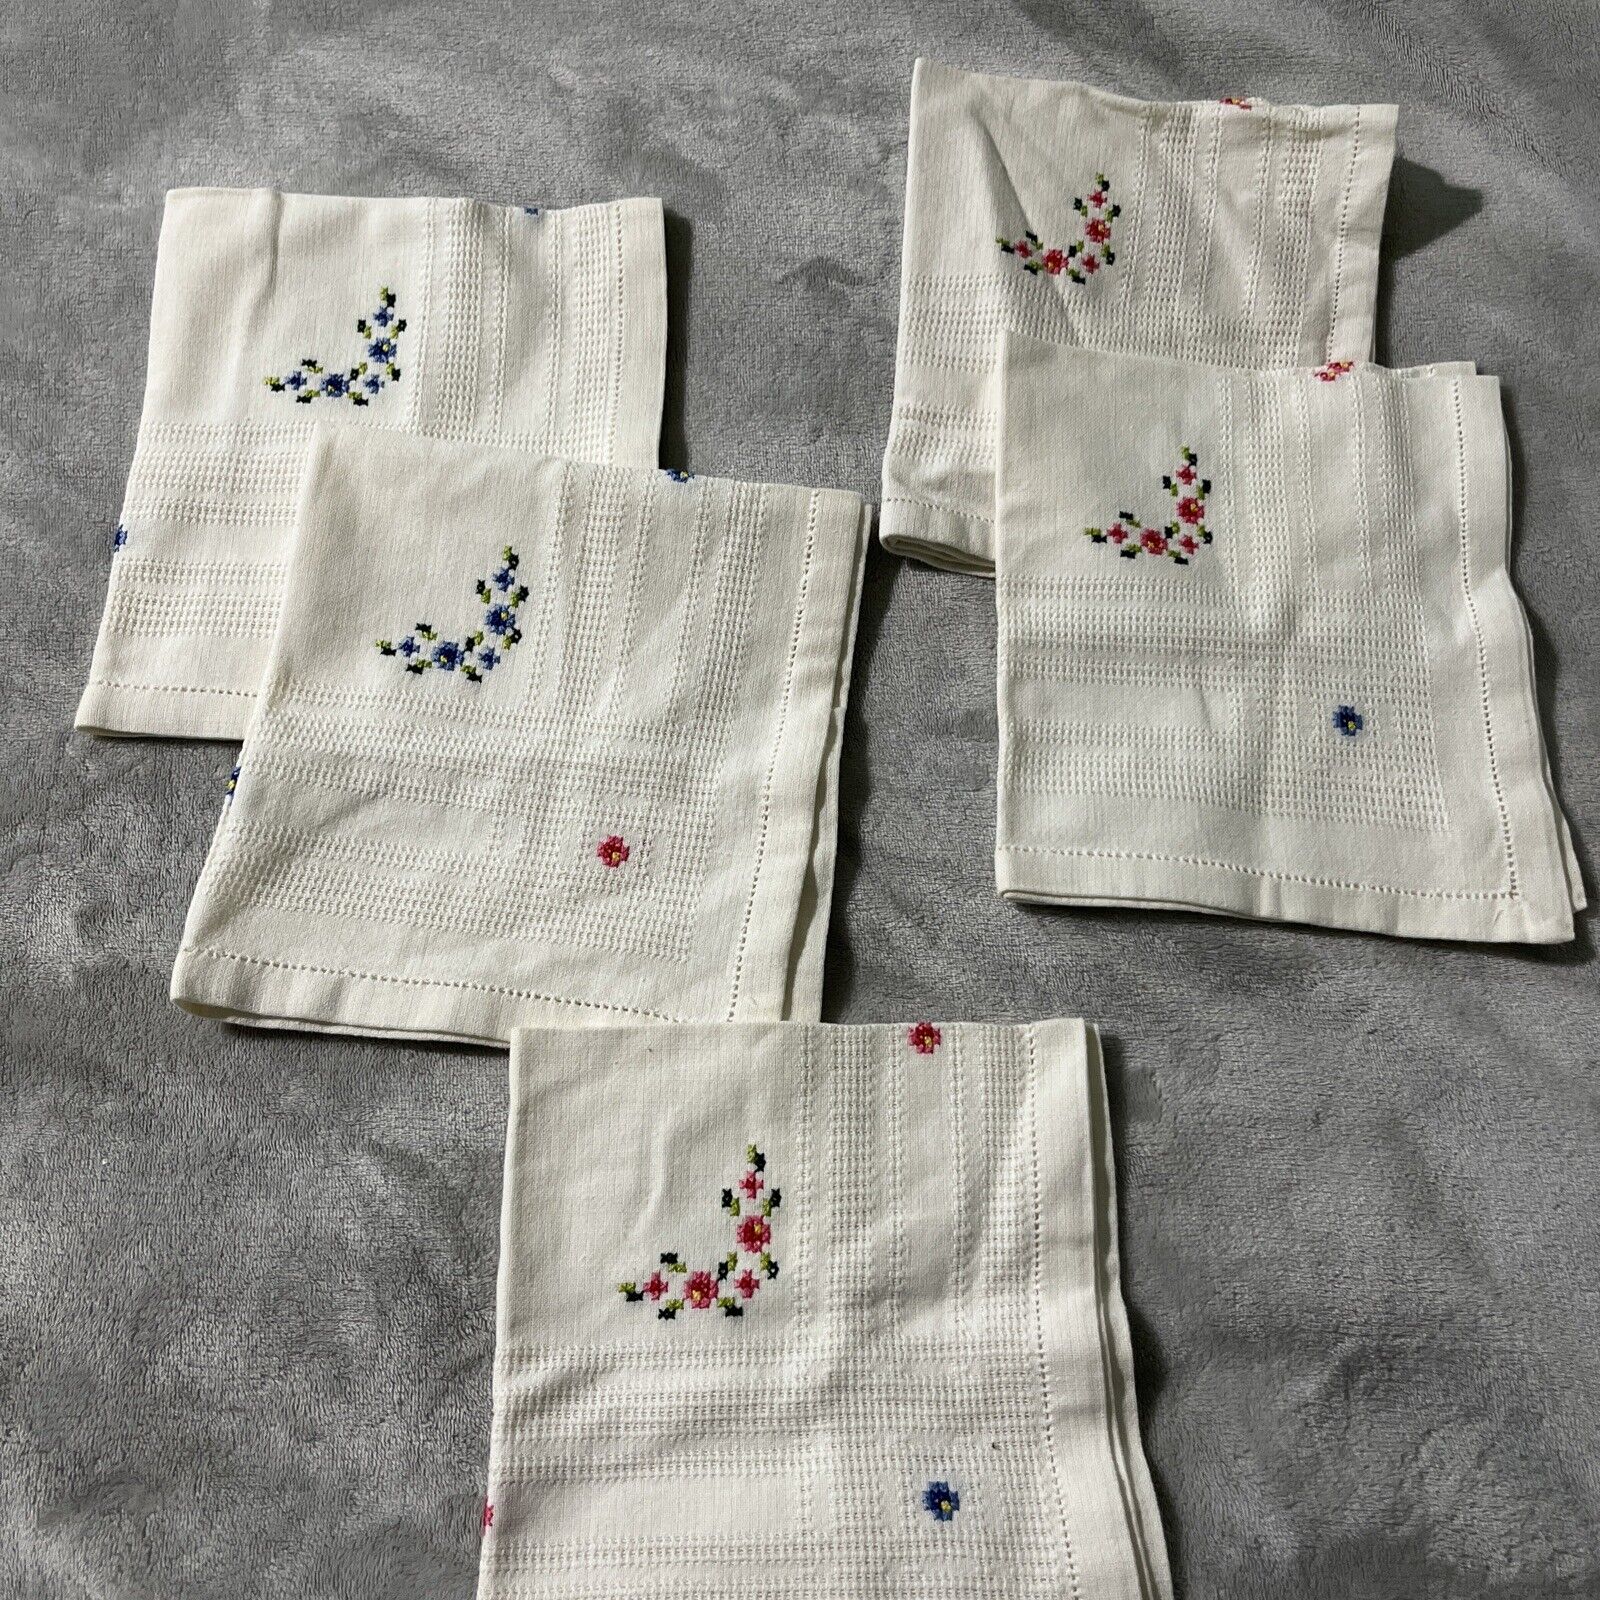 Vintage Napkins, Linen, Flower Cross Stitch Embroidery, Off White/Beige Lot Of 5